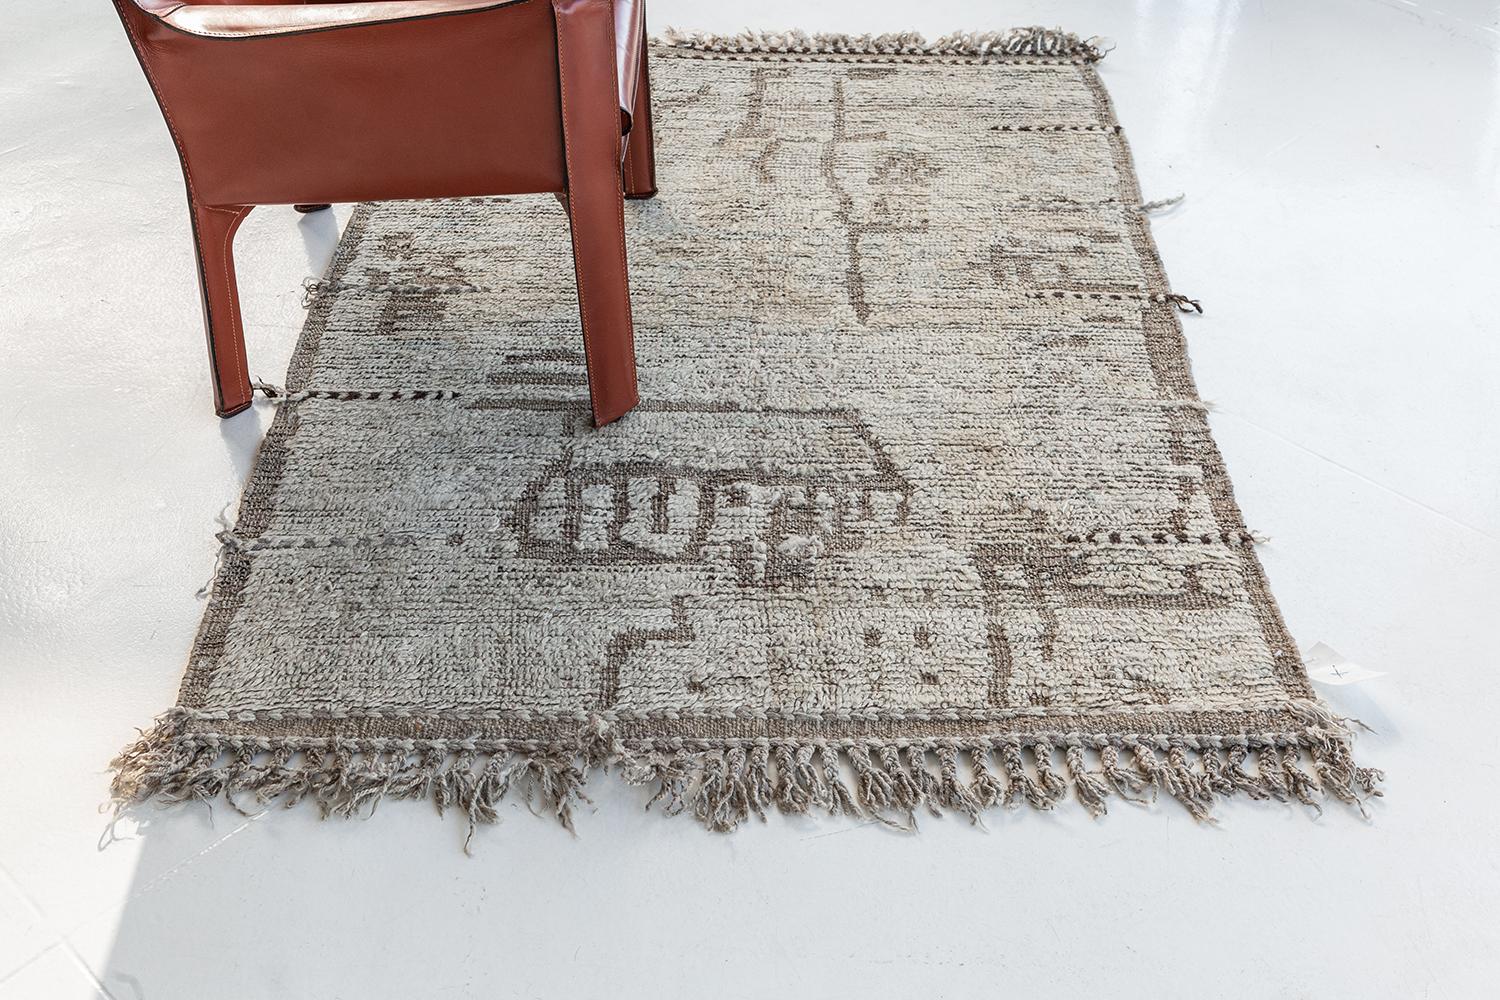 Meliska is a captivating textured rug with irregular motifs inspired by the Atlas Mountains of Morocco. Earthy tones of ivory, and chocolate brown surrounded by umber brown shag work cohesively to make for a great contemporary interpretation for the